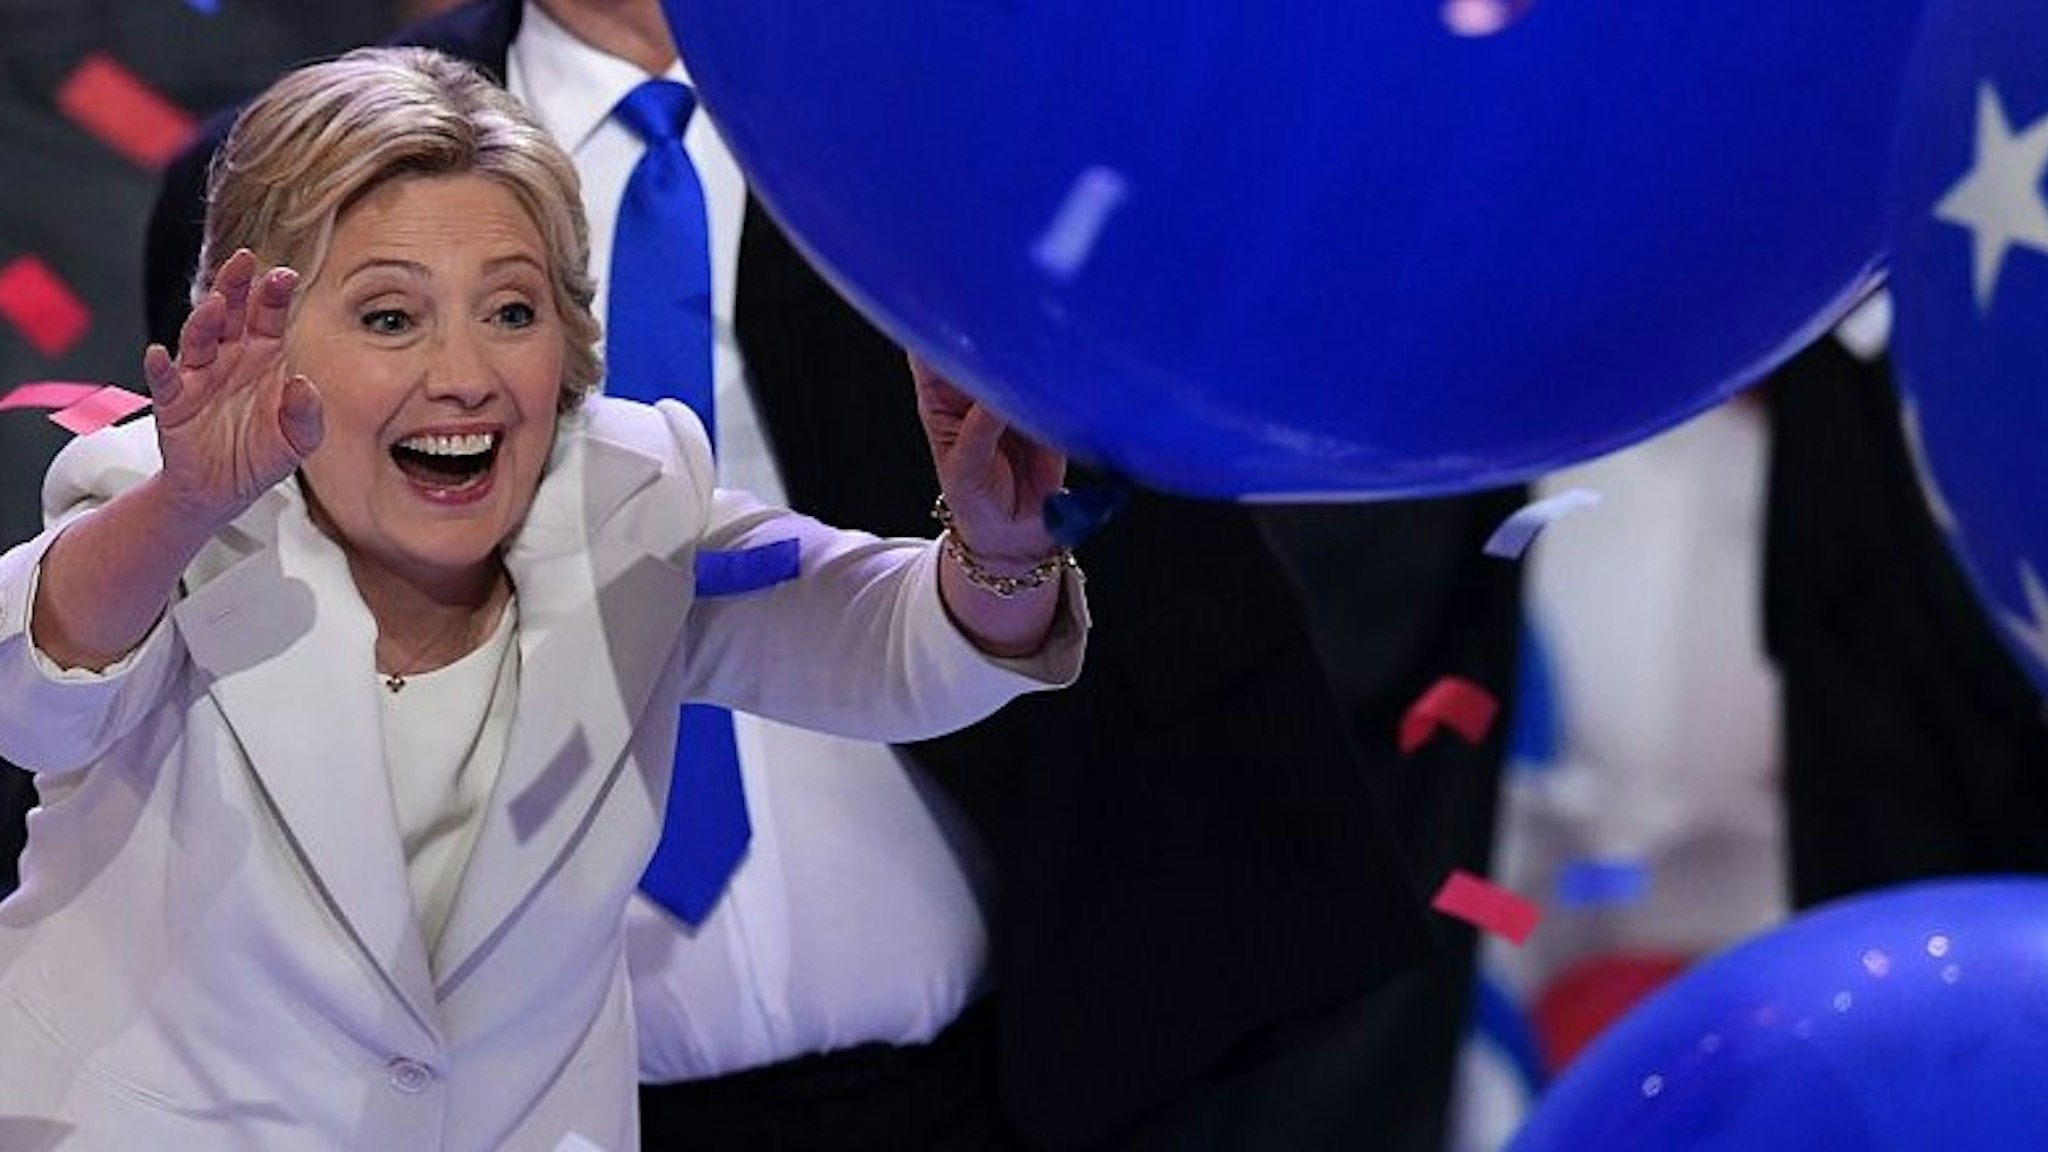 Balloons descend as Democratic presidential nominee Hillary Clinton celebrates on the fourth and final night of the Democratic National Convention at Wells Fargo Center on July 28, 2016 in Philadelphia, Pennsylvania